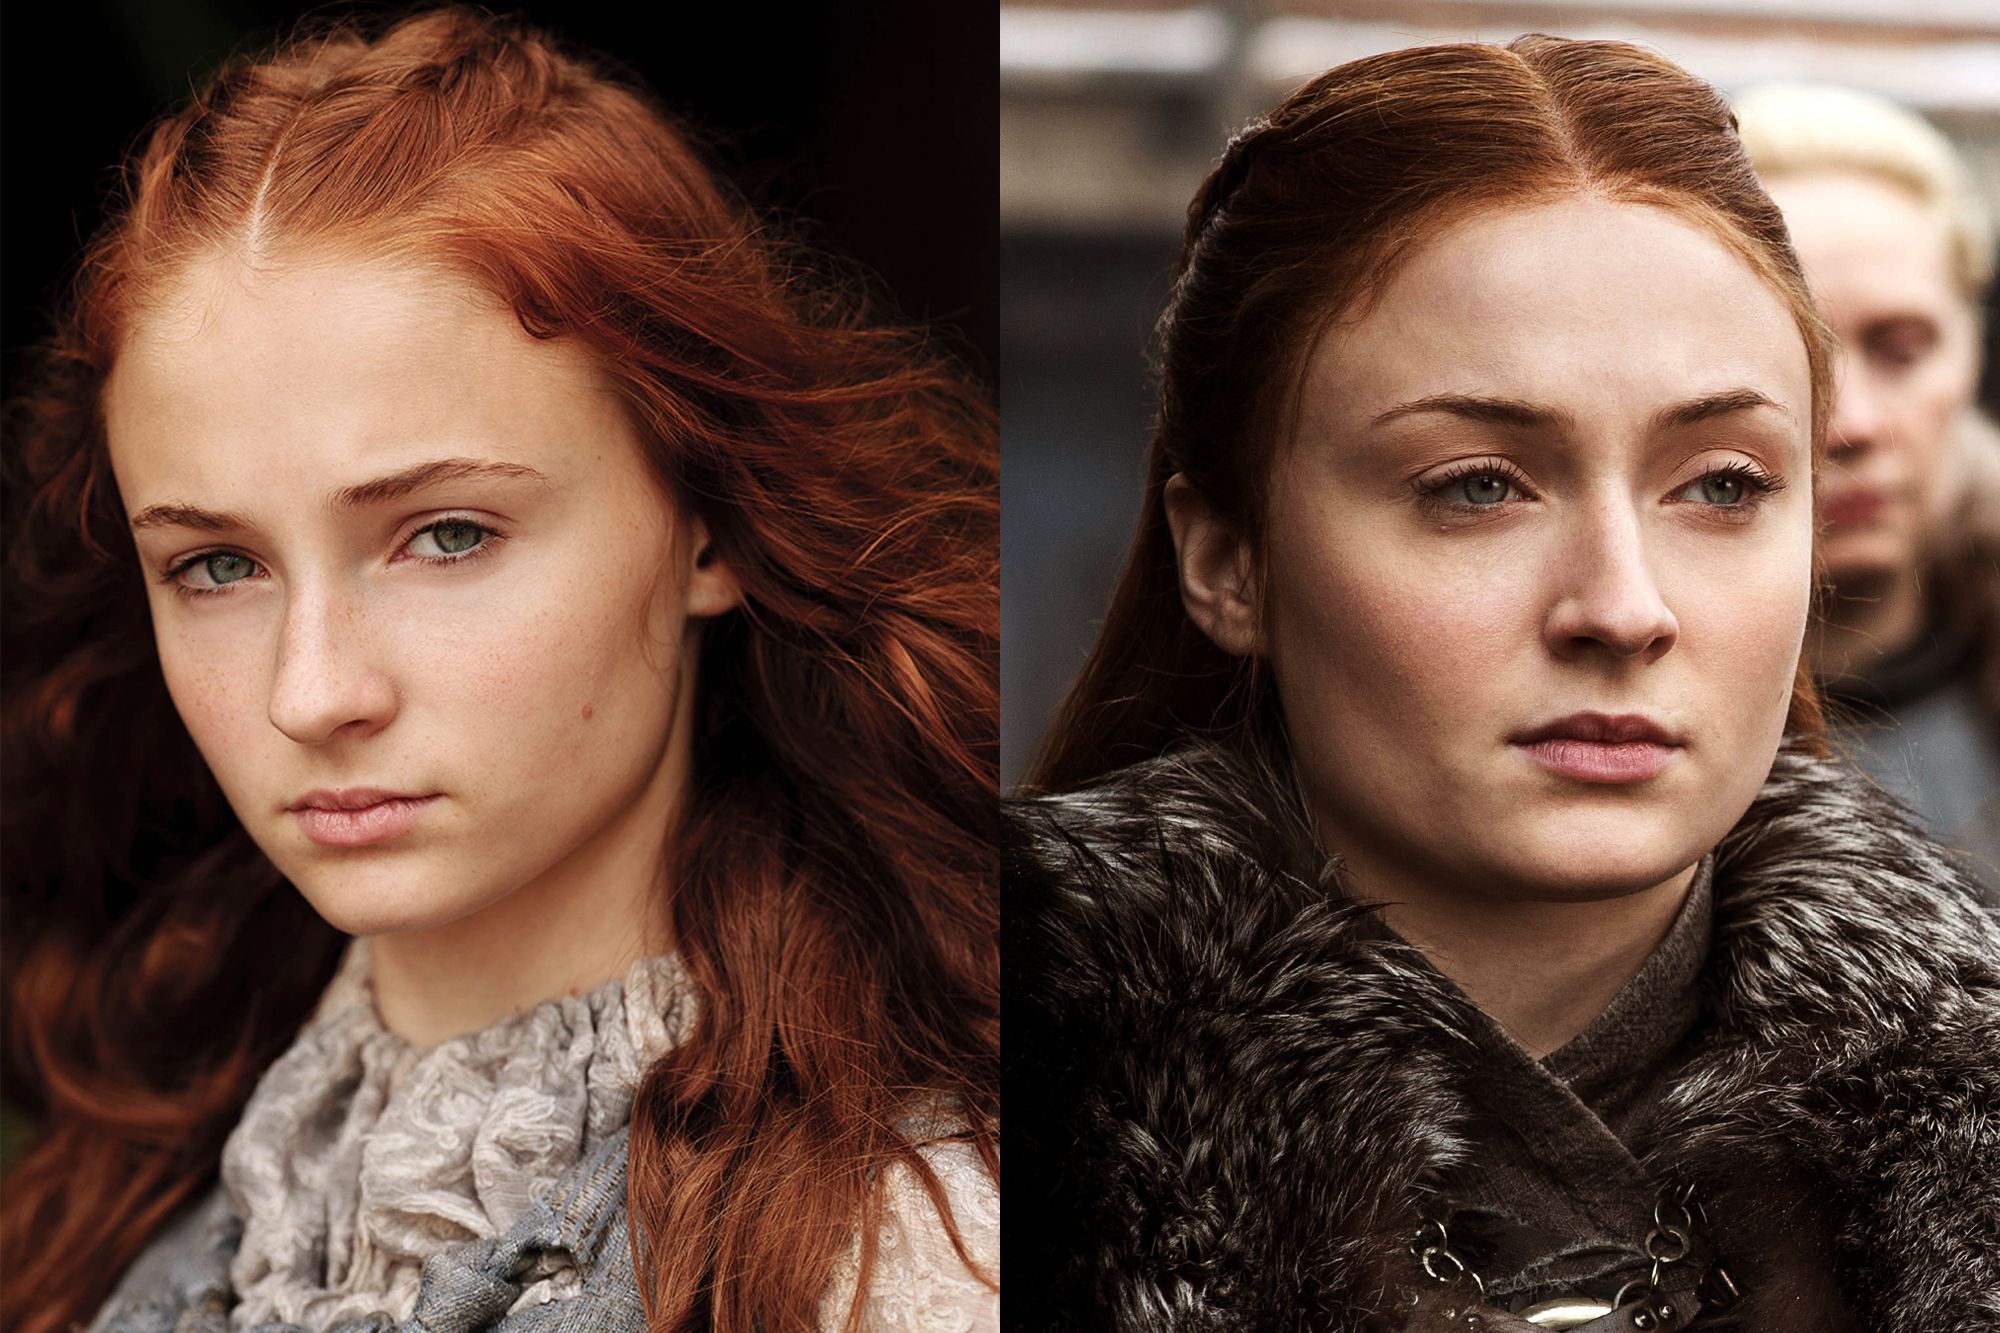 Game of Thrones Character Evolutions from Seasons 1-8